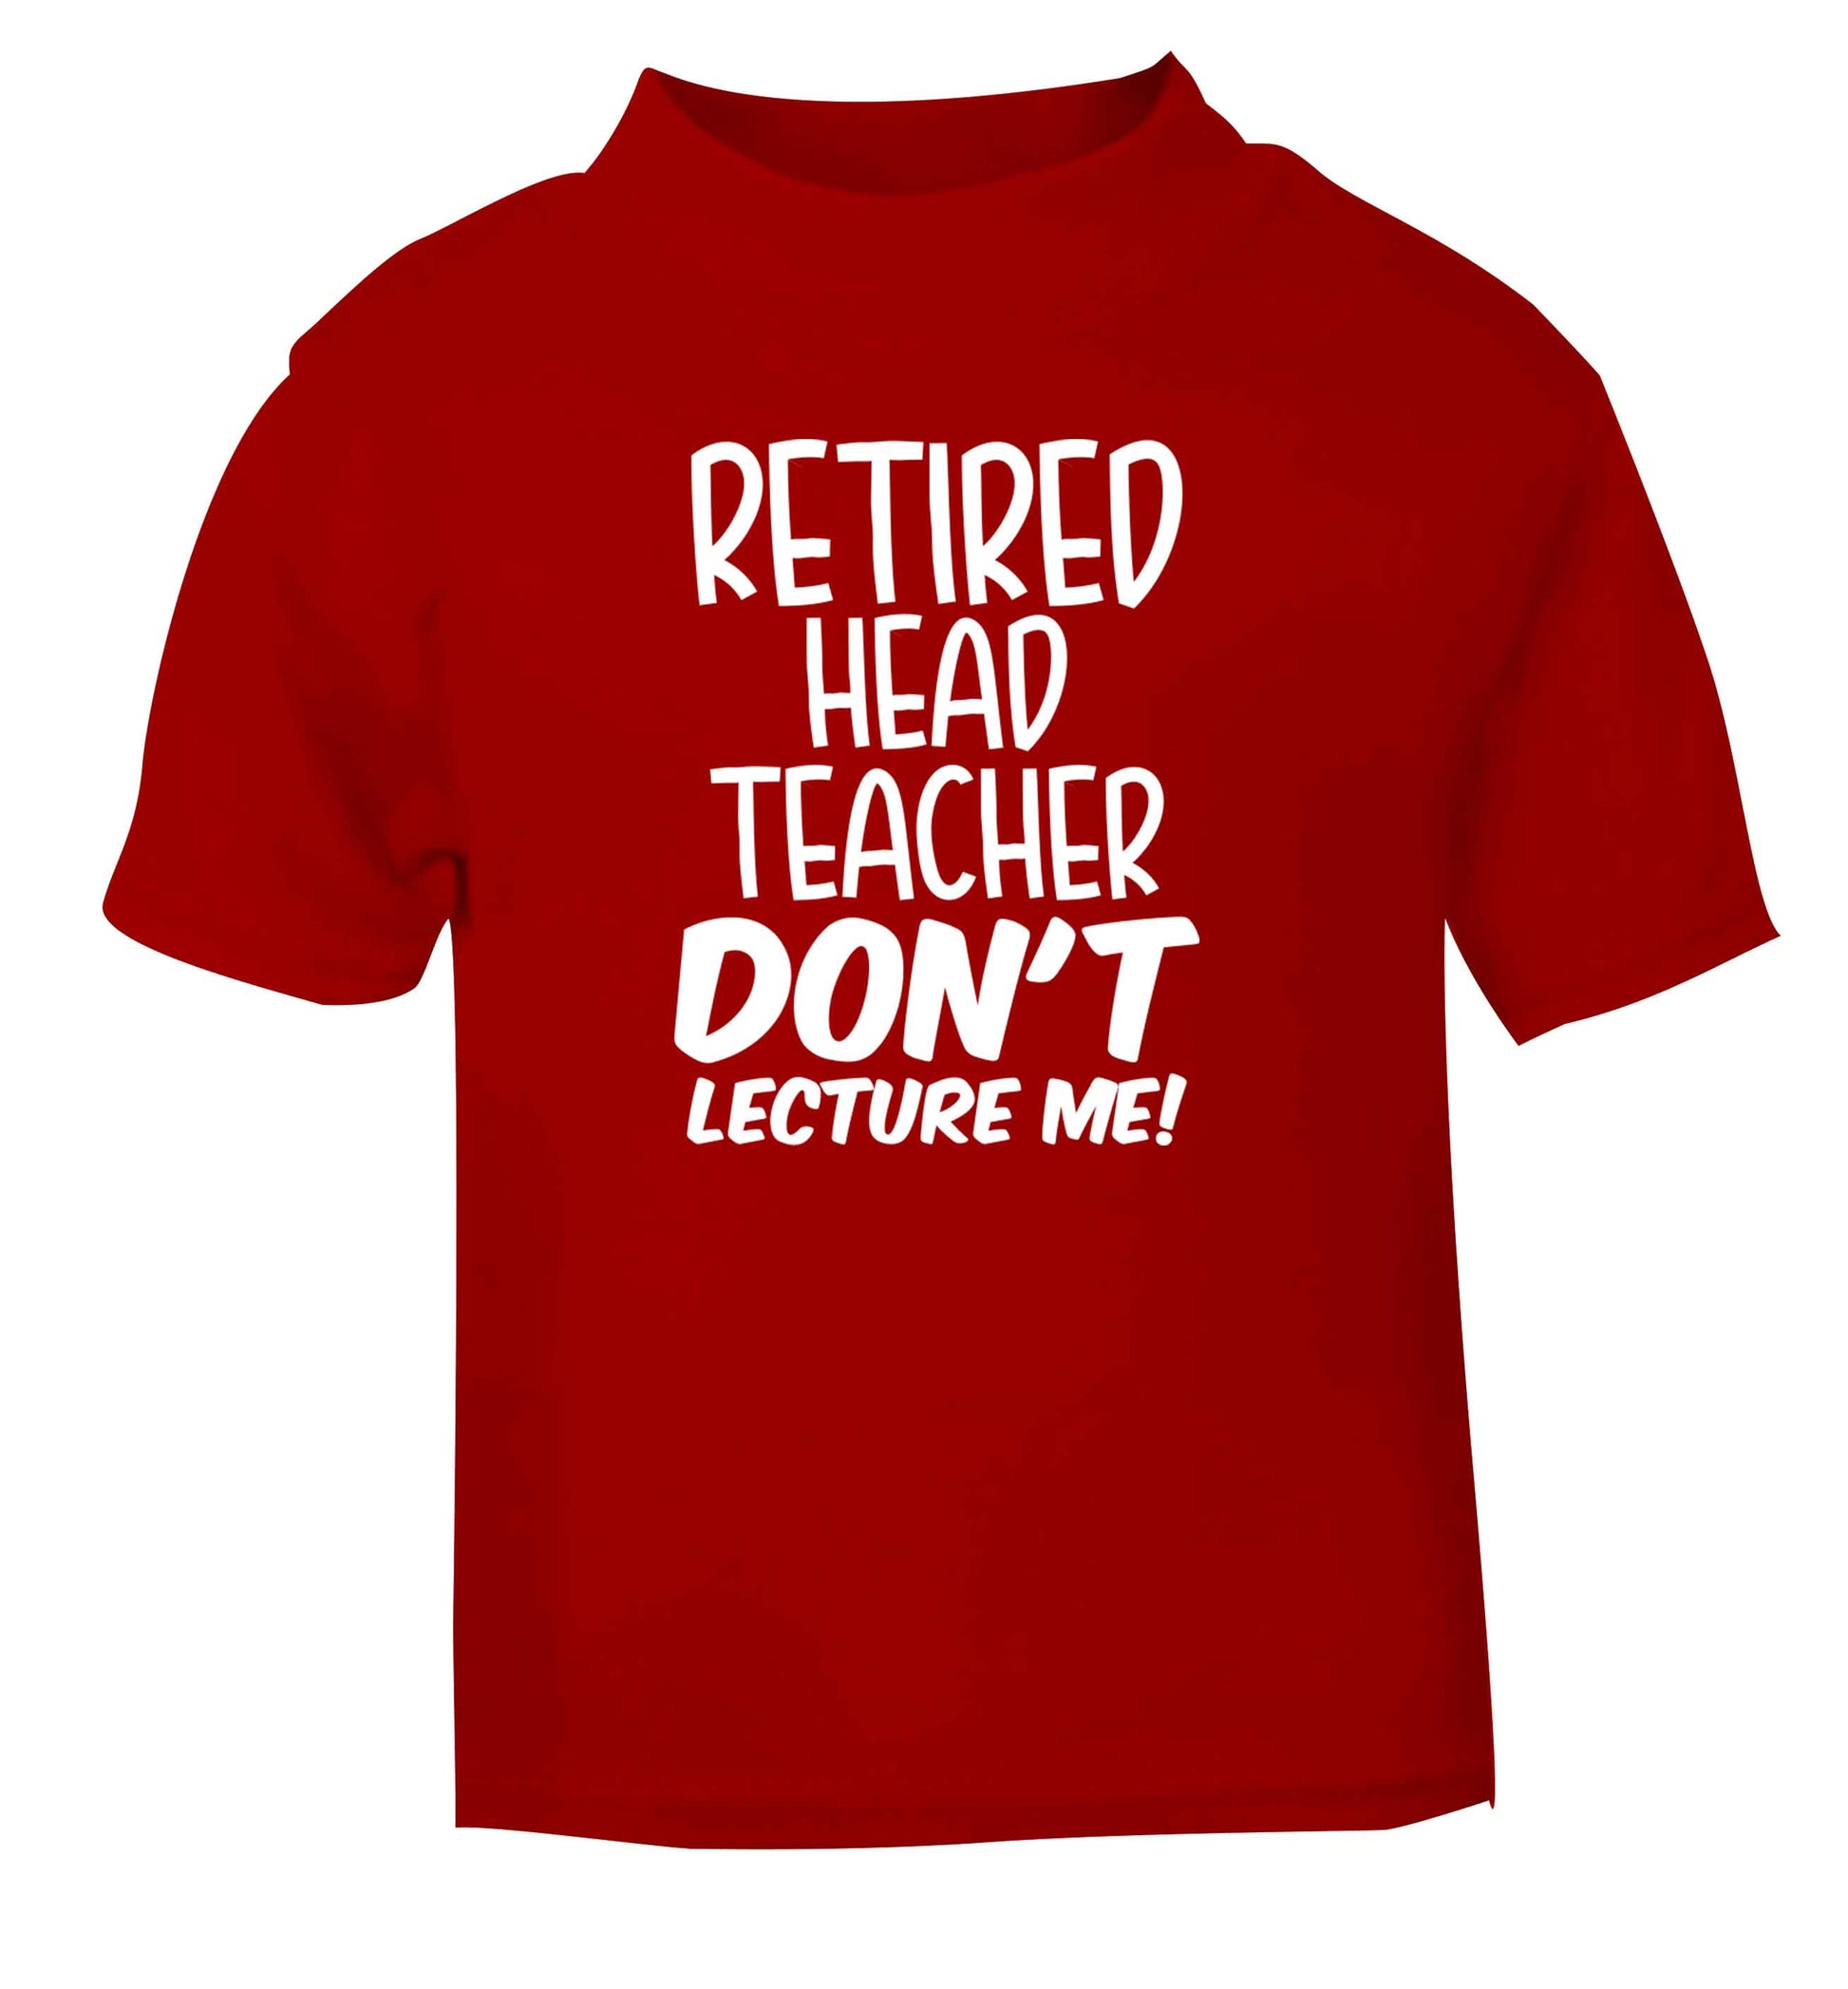 Retired head teacher don't lecture me! red Baby Toddler Tshirt 2 Years